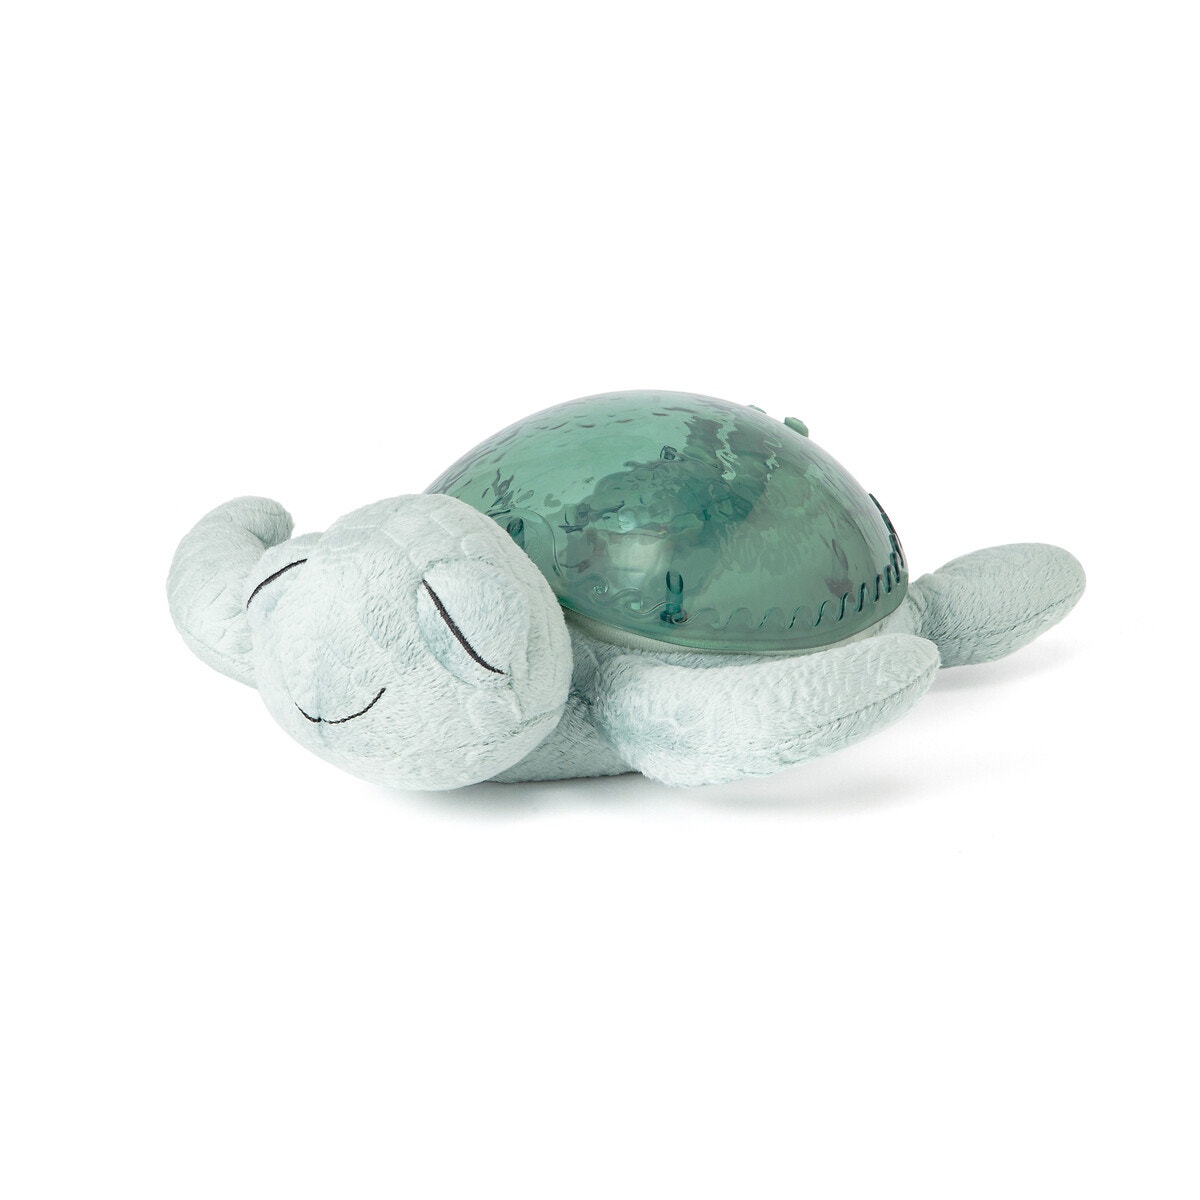 Peluche lumineuse - Tranquil whale - Cloud B